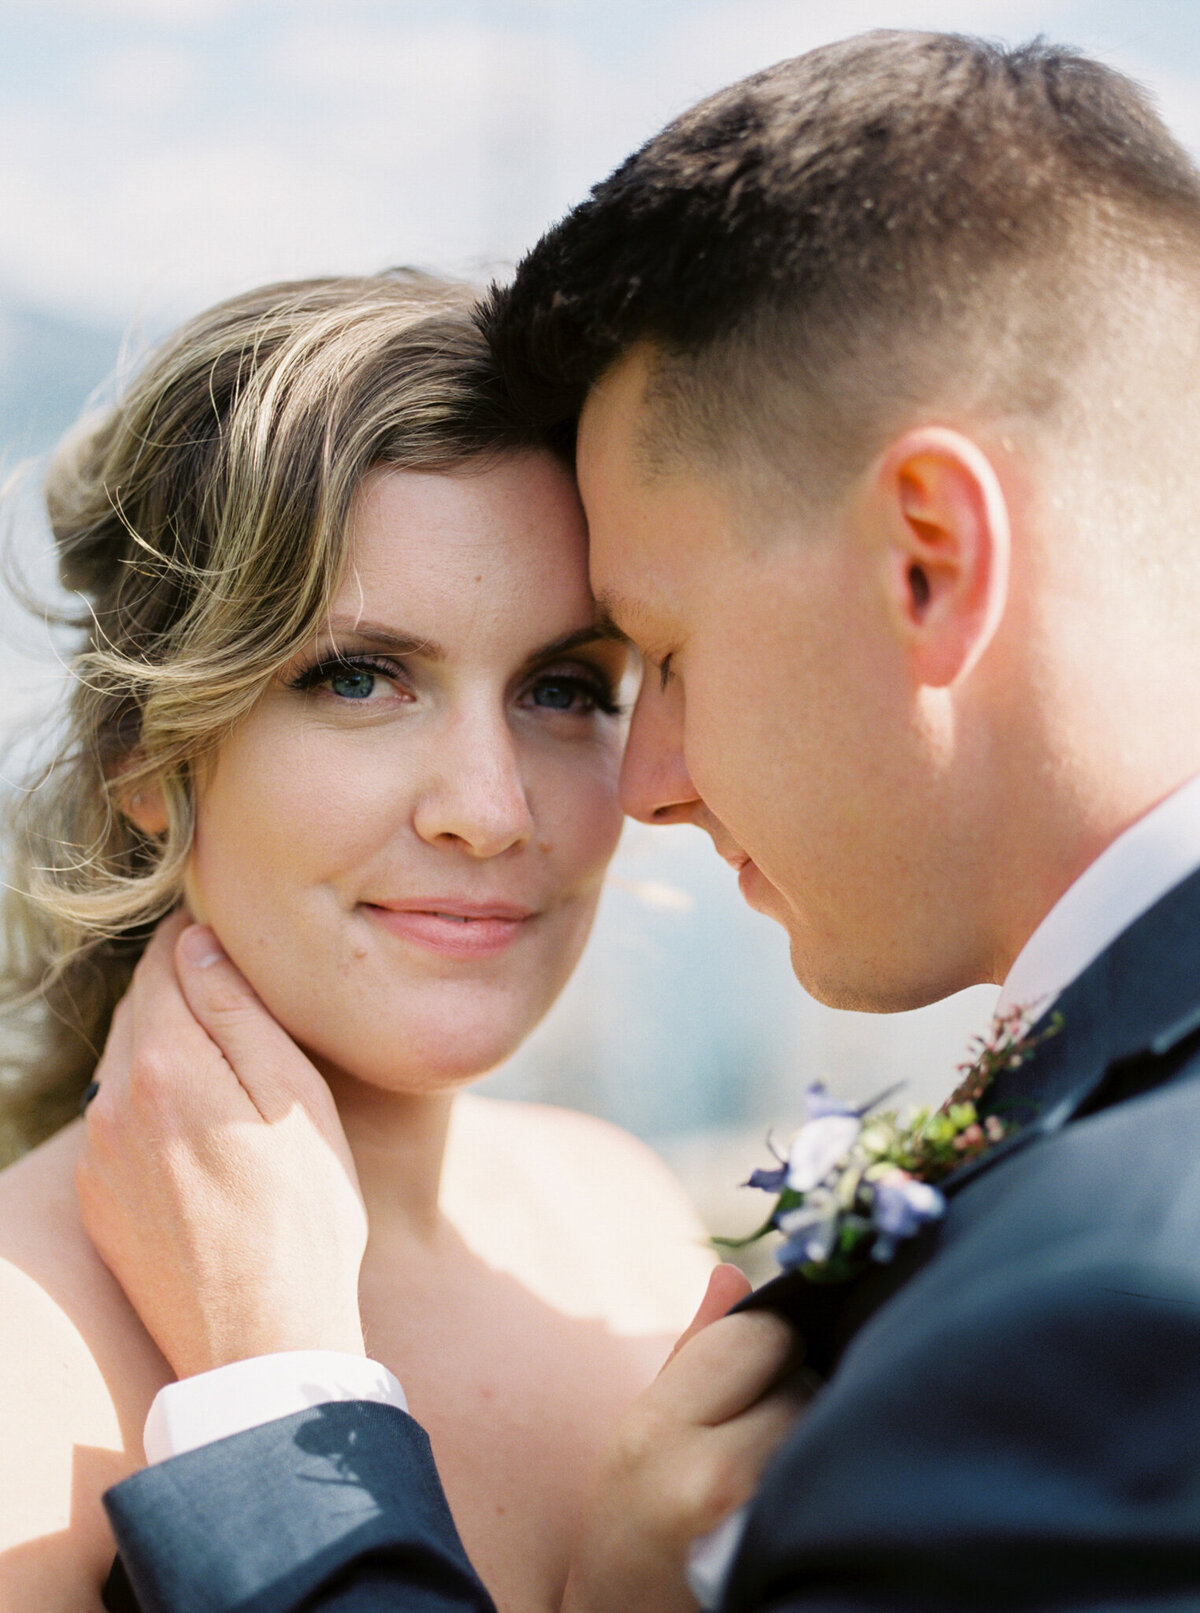 Stunning wedding portrait of bride and groom captured by Pam Kriangkum Photography, fine art, classic wedding photographer in Edmonton, Alberta. Featured on the Bronte Bride Vendor Guide.